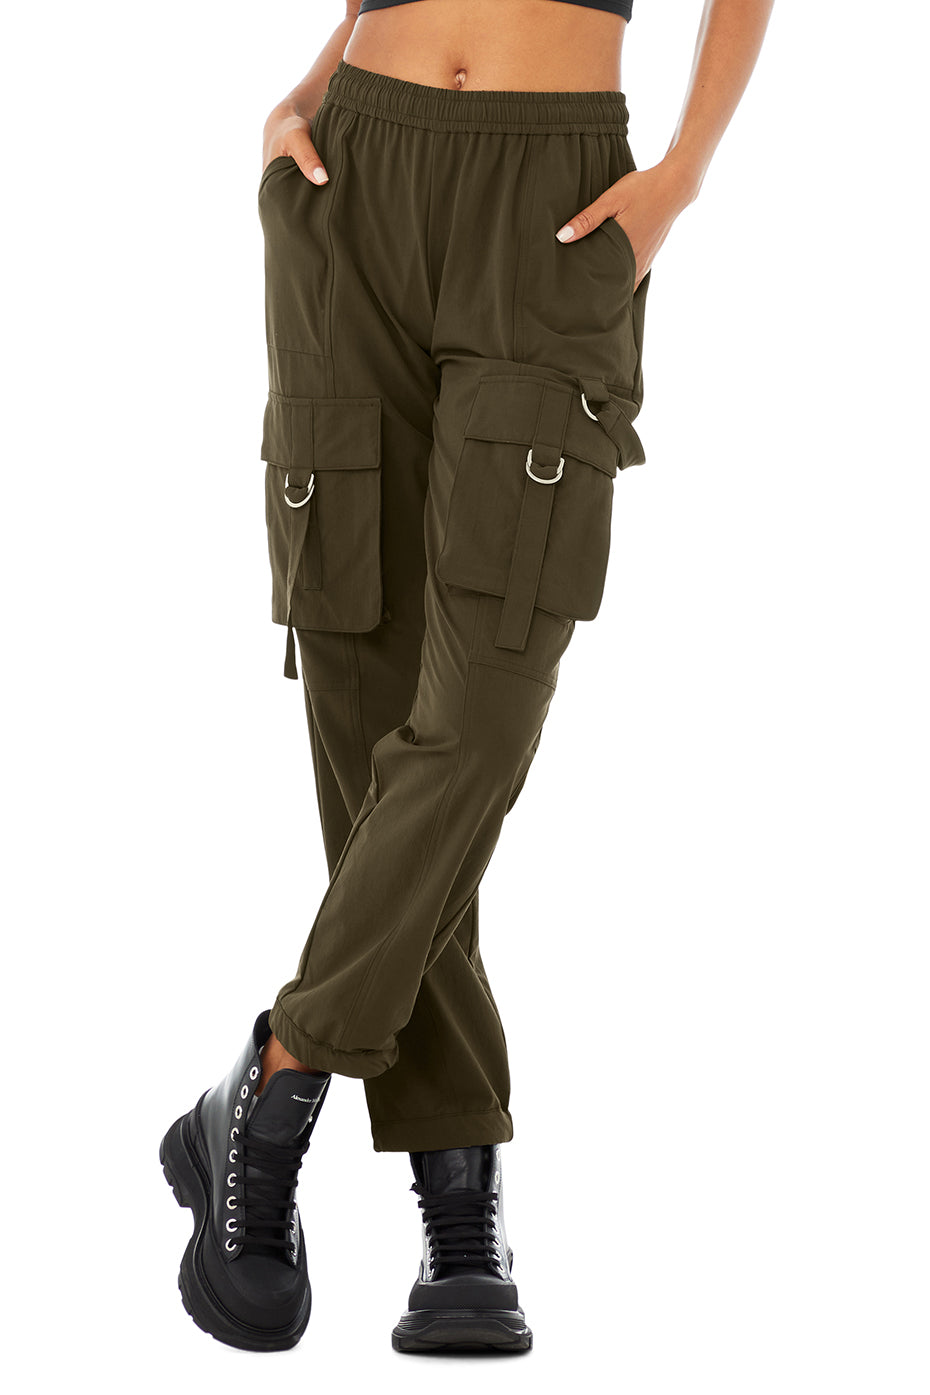 High-Waist City Wise Cargo Pants in Dark Olive by Alo Yoga